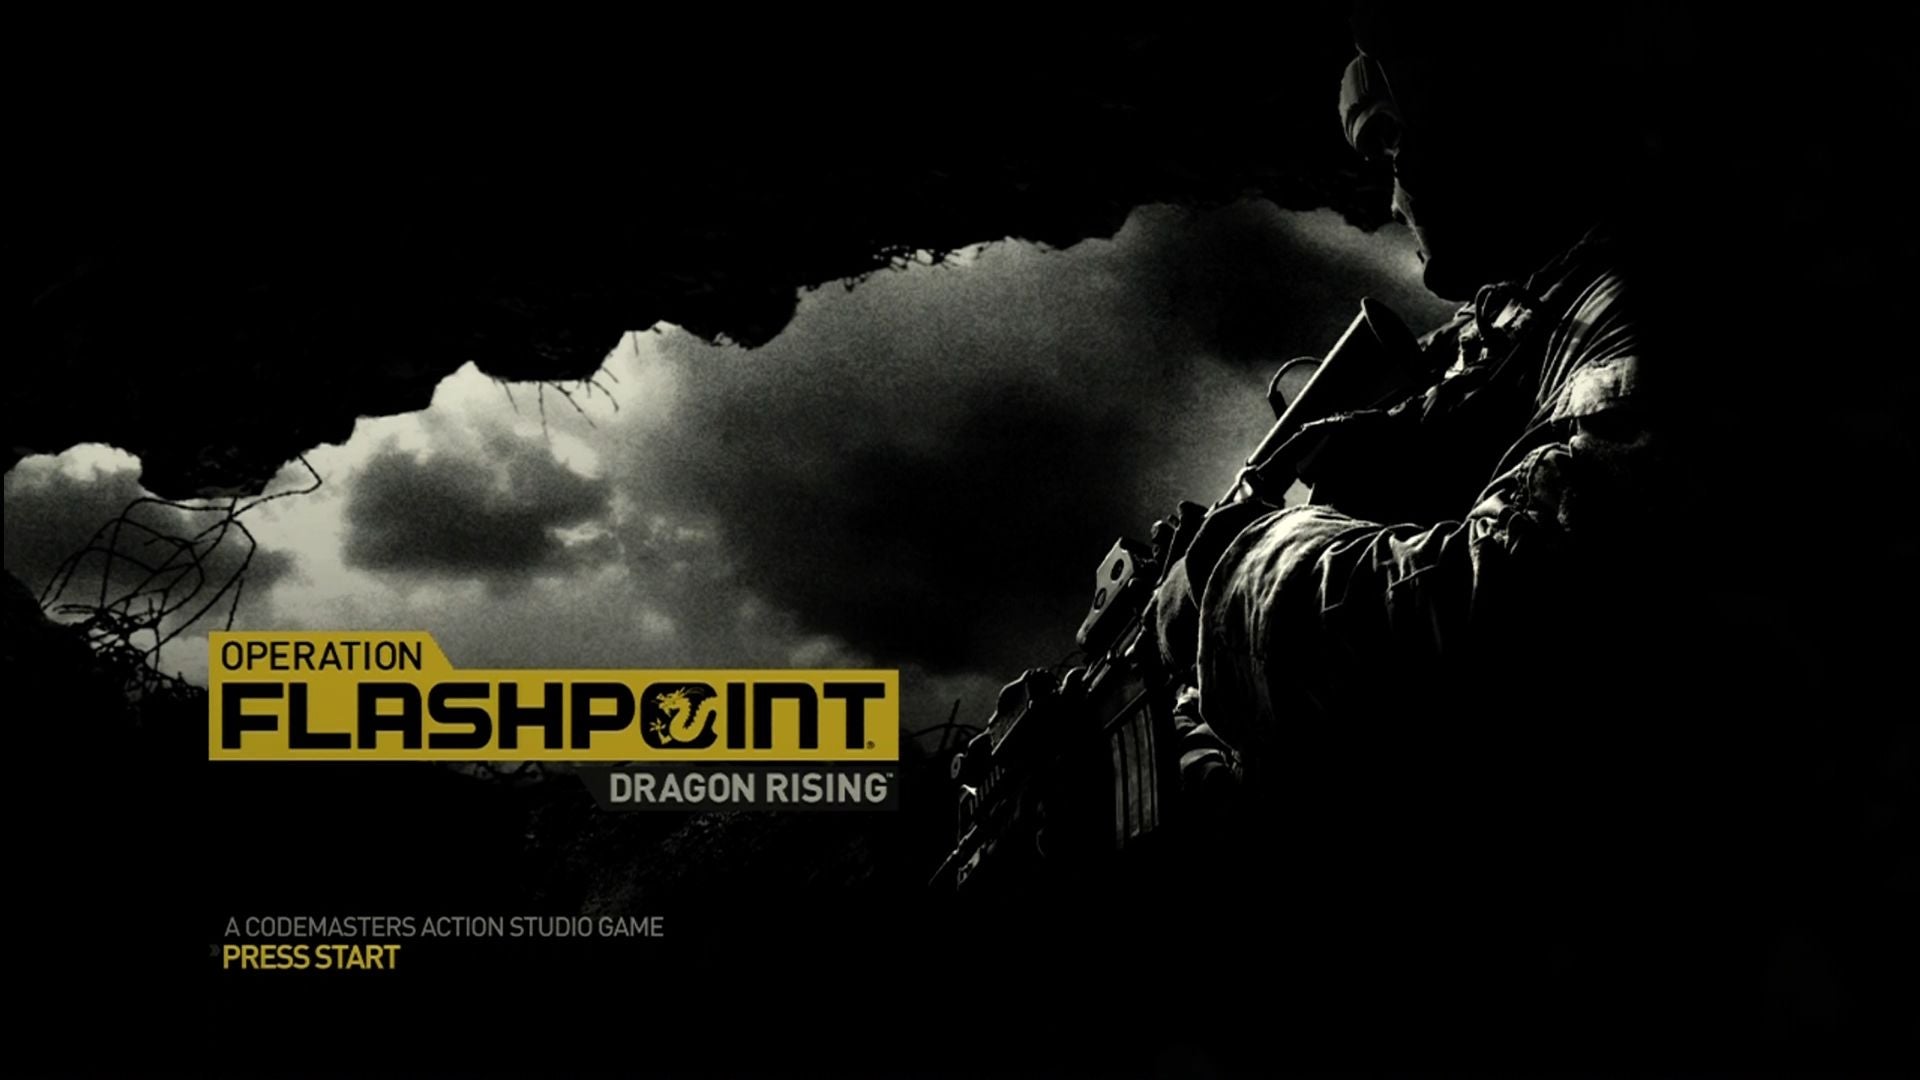 Operation Flashpoint: Dragon Rising - PlayStation 3 (PS3) Game